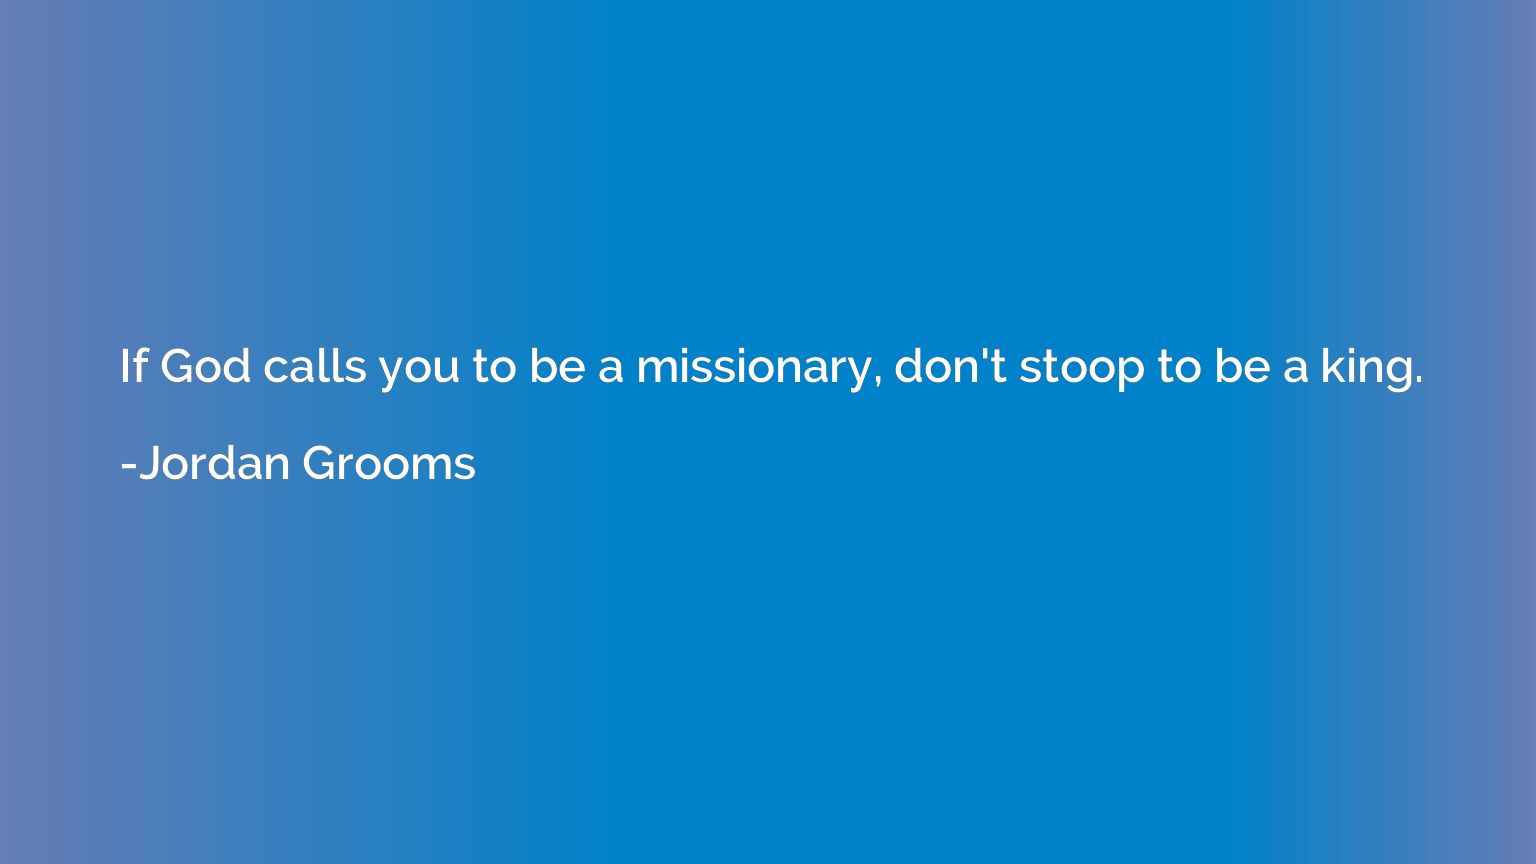 If God calls you to be a missionary, don't stoop to be a kin